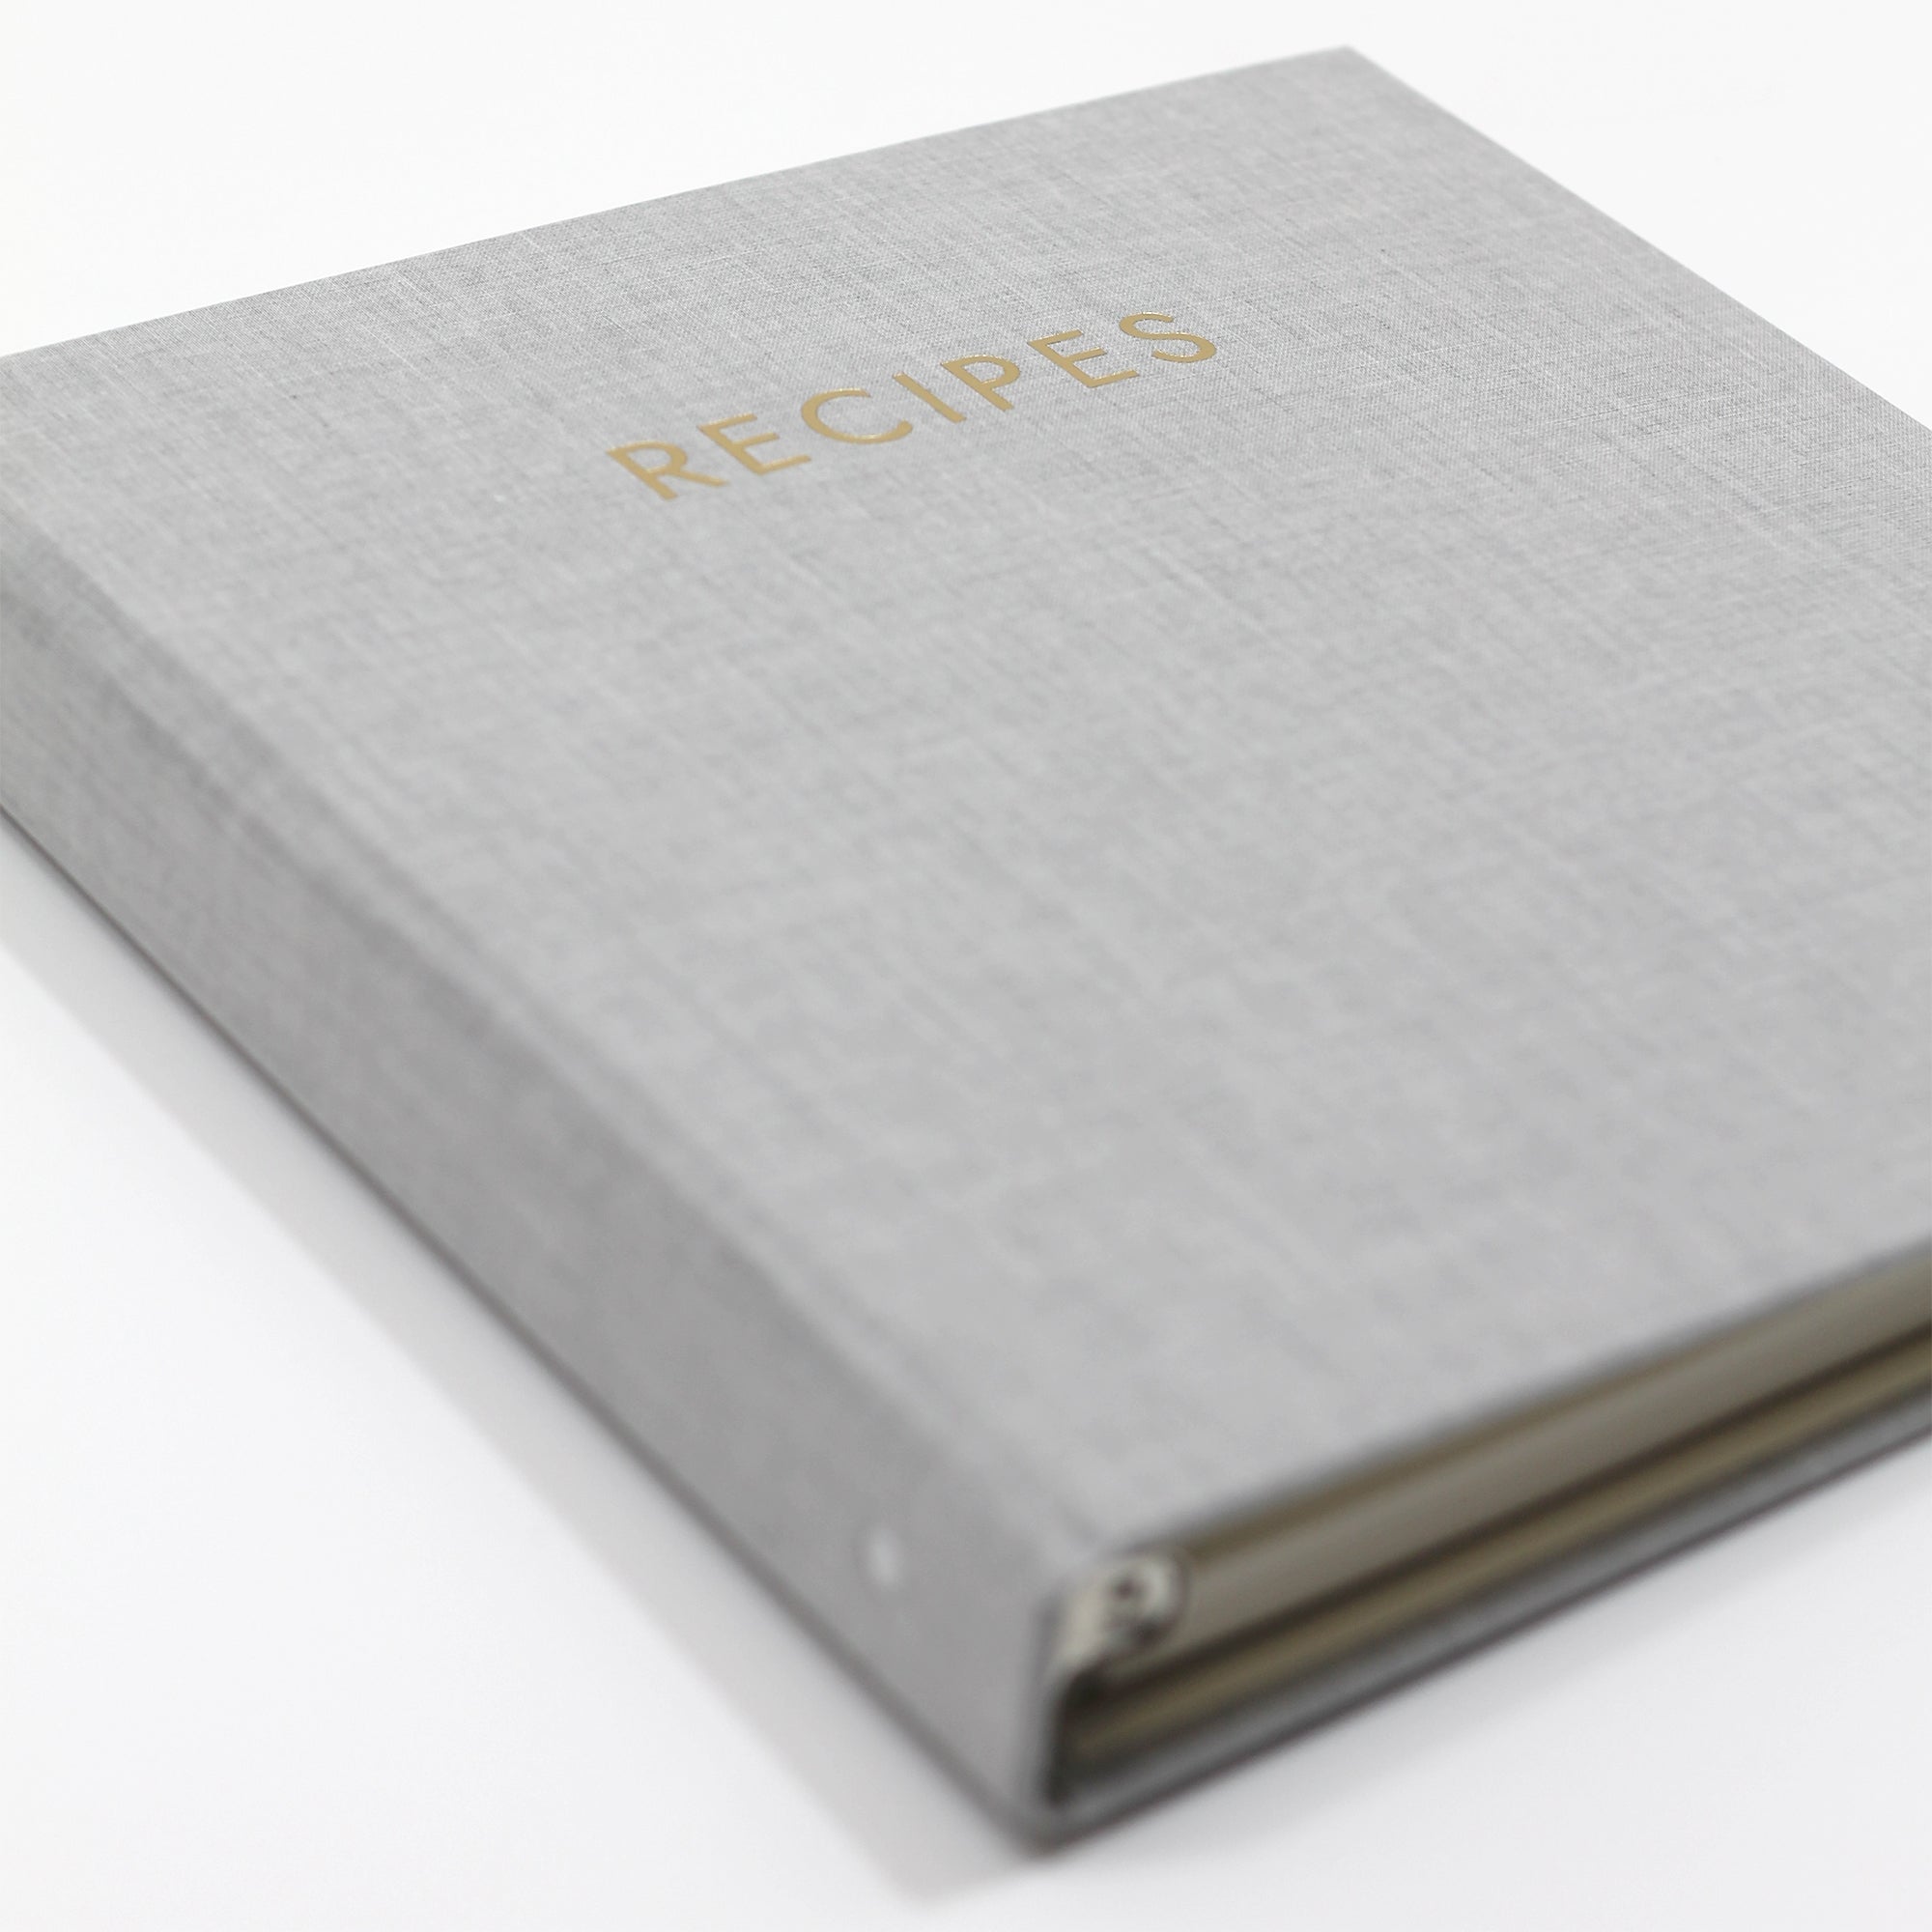 Our Family Recipes: A Meals and Memories Keepsake (Grey)